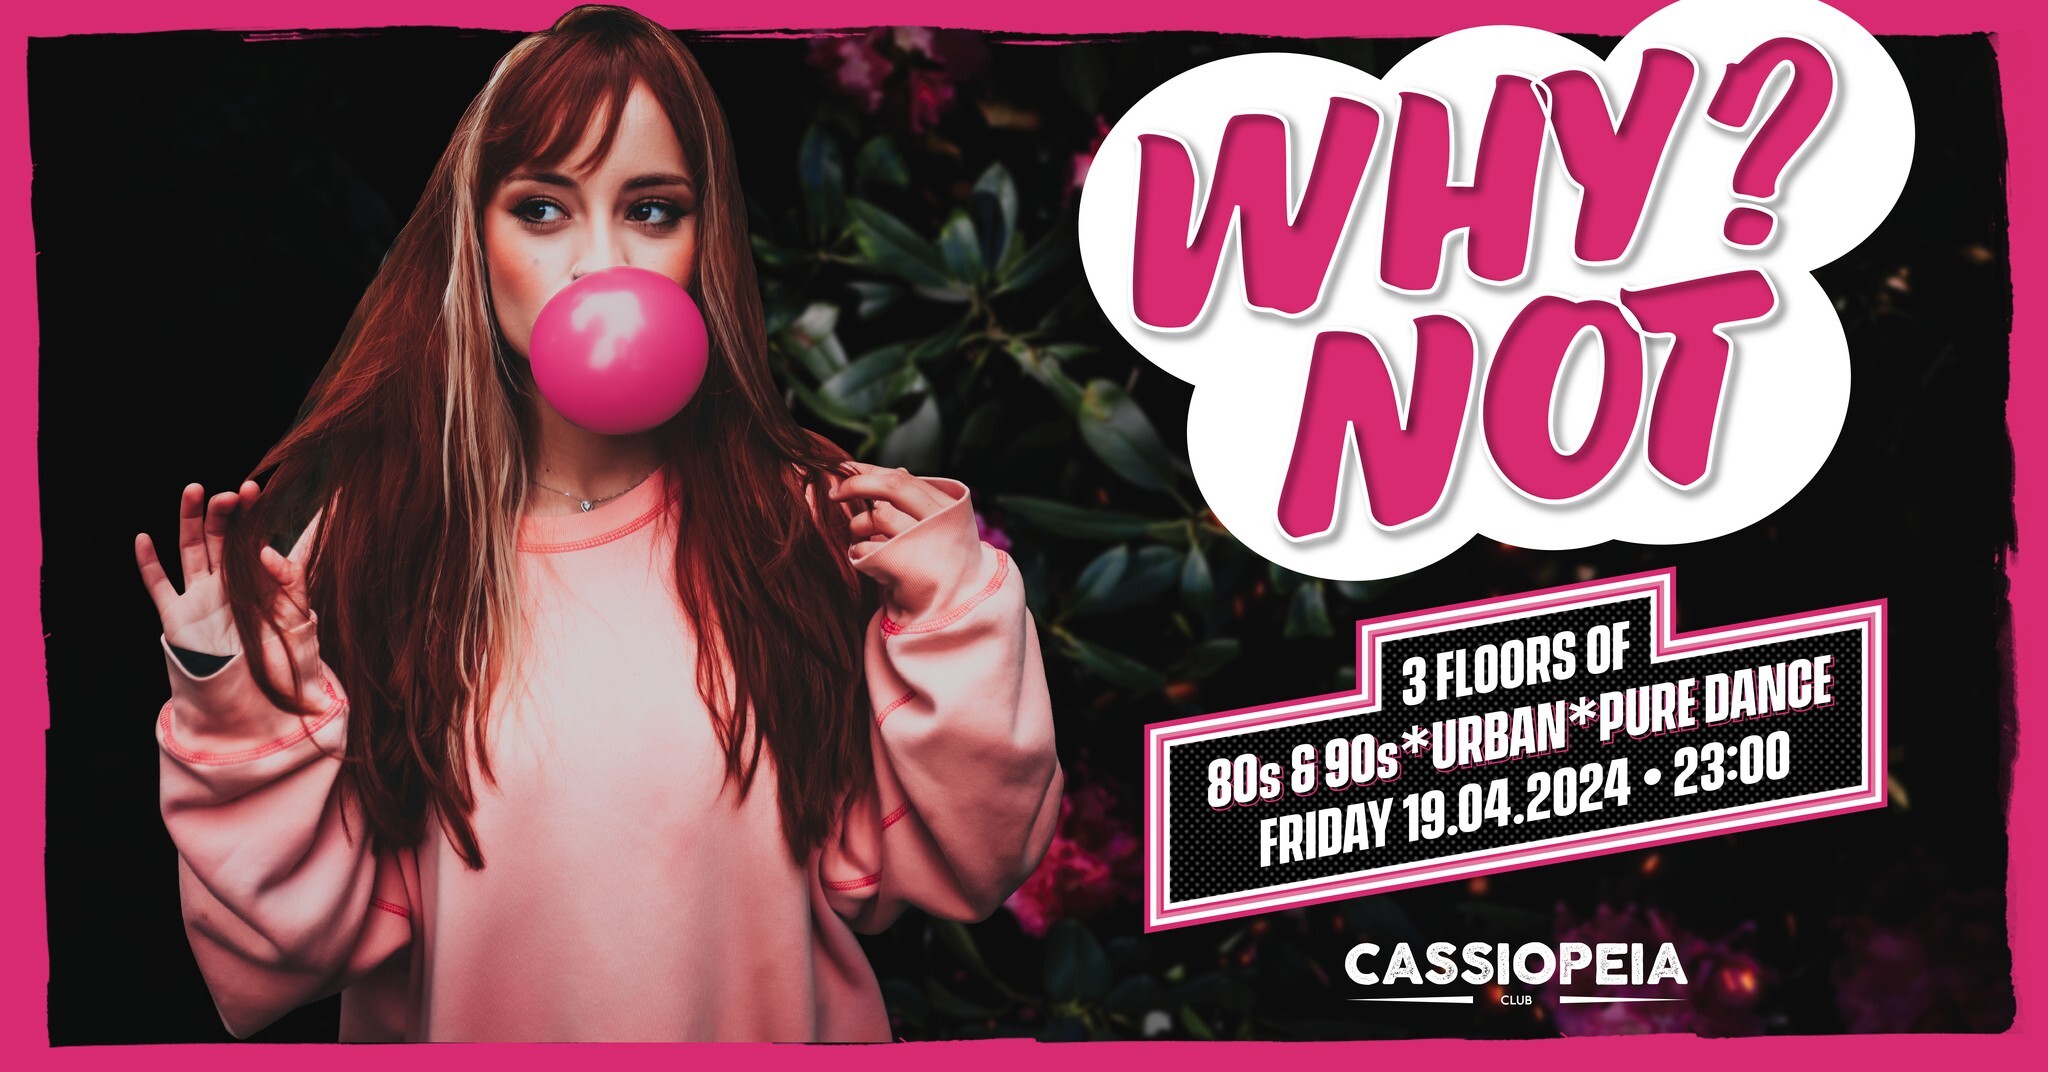 Cassiopeia 19.04.2024 WhyNot / Your favorite party - Dancing in Berlin - 3 Floors & Outdoor Area